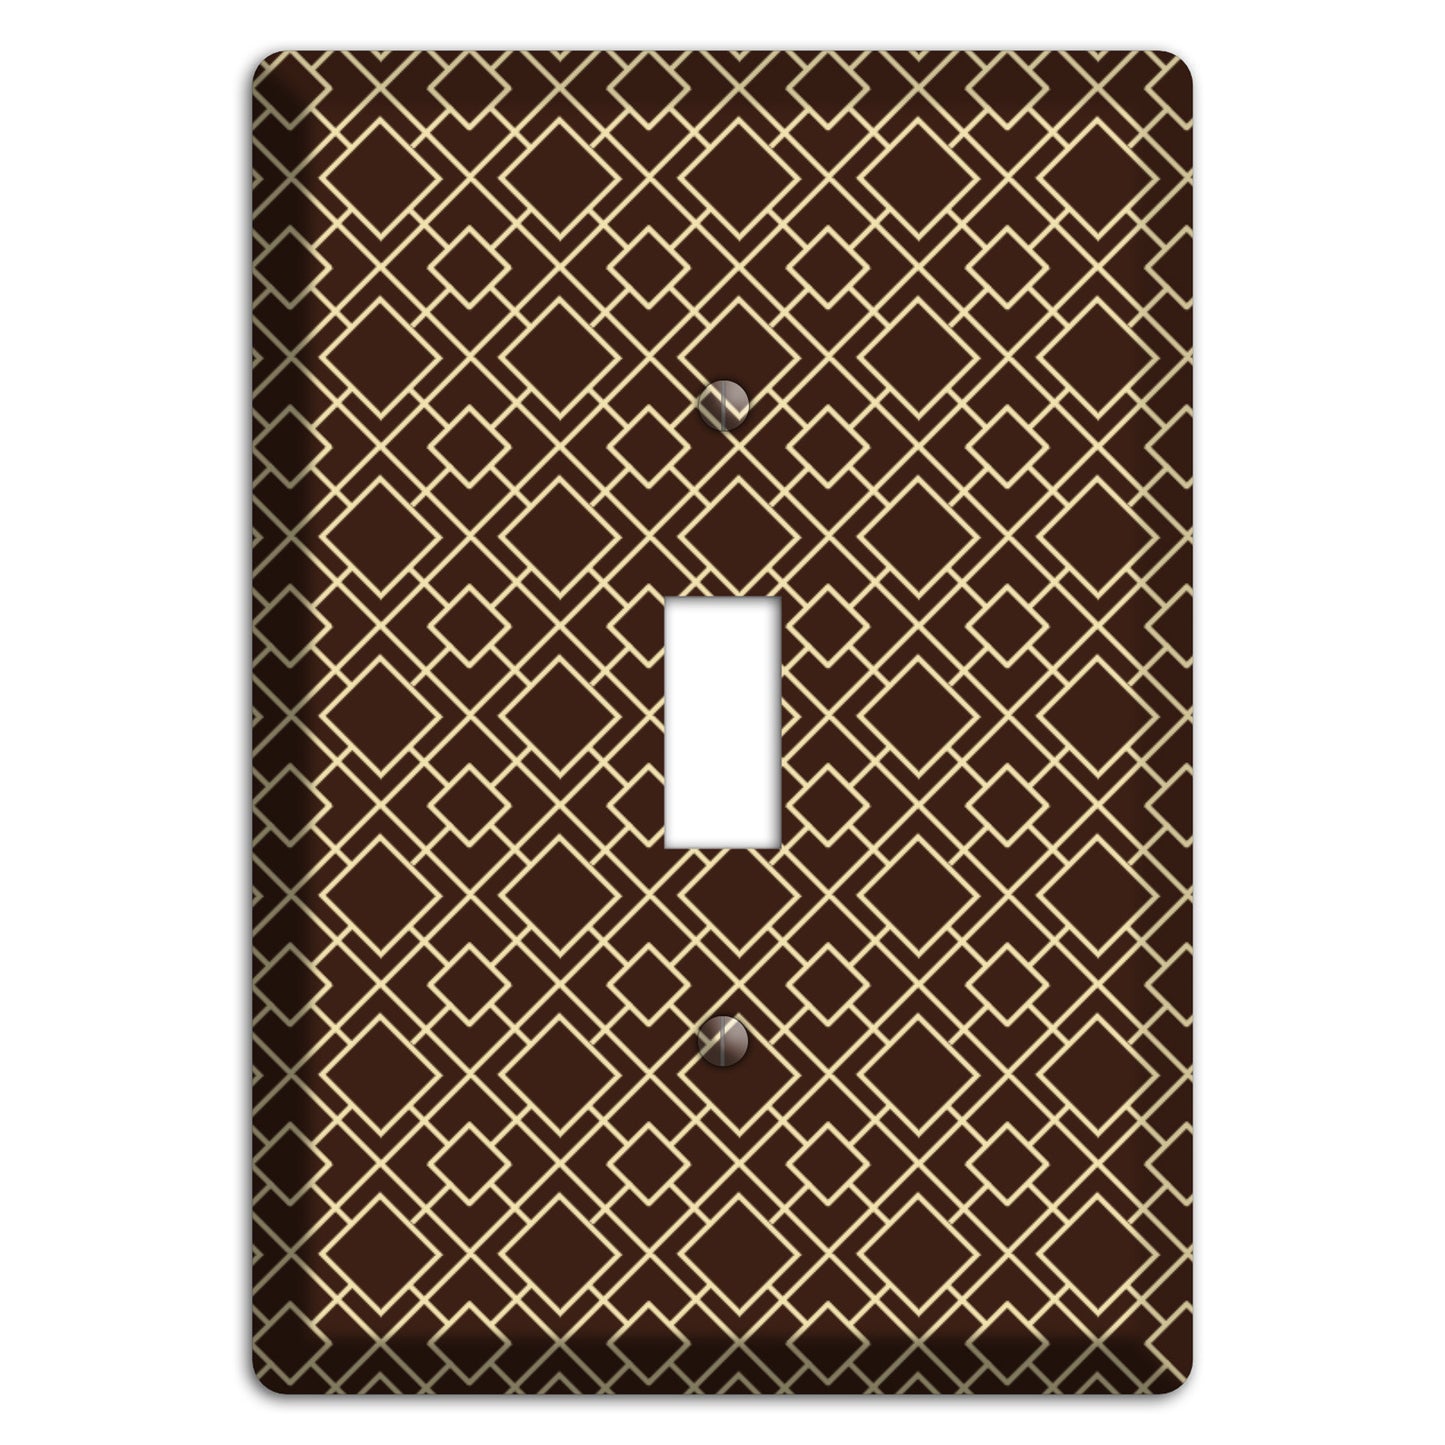 Asian Square Pattern Cover Plates